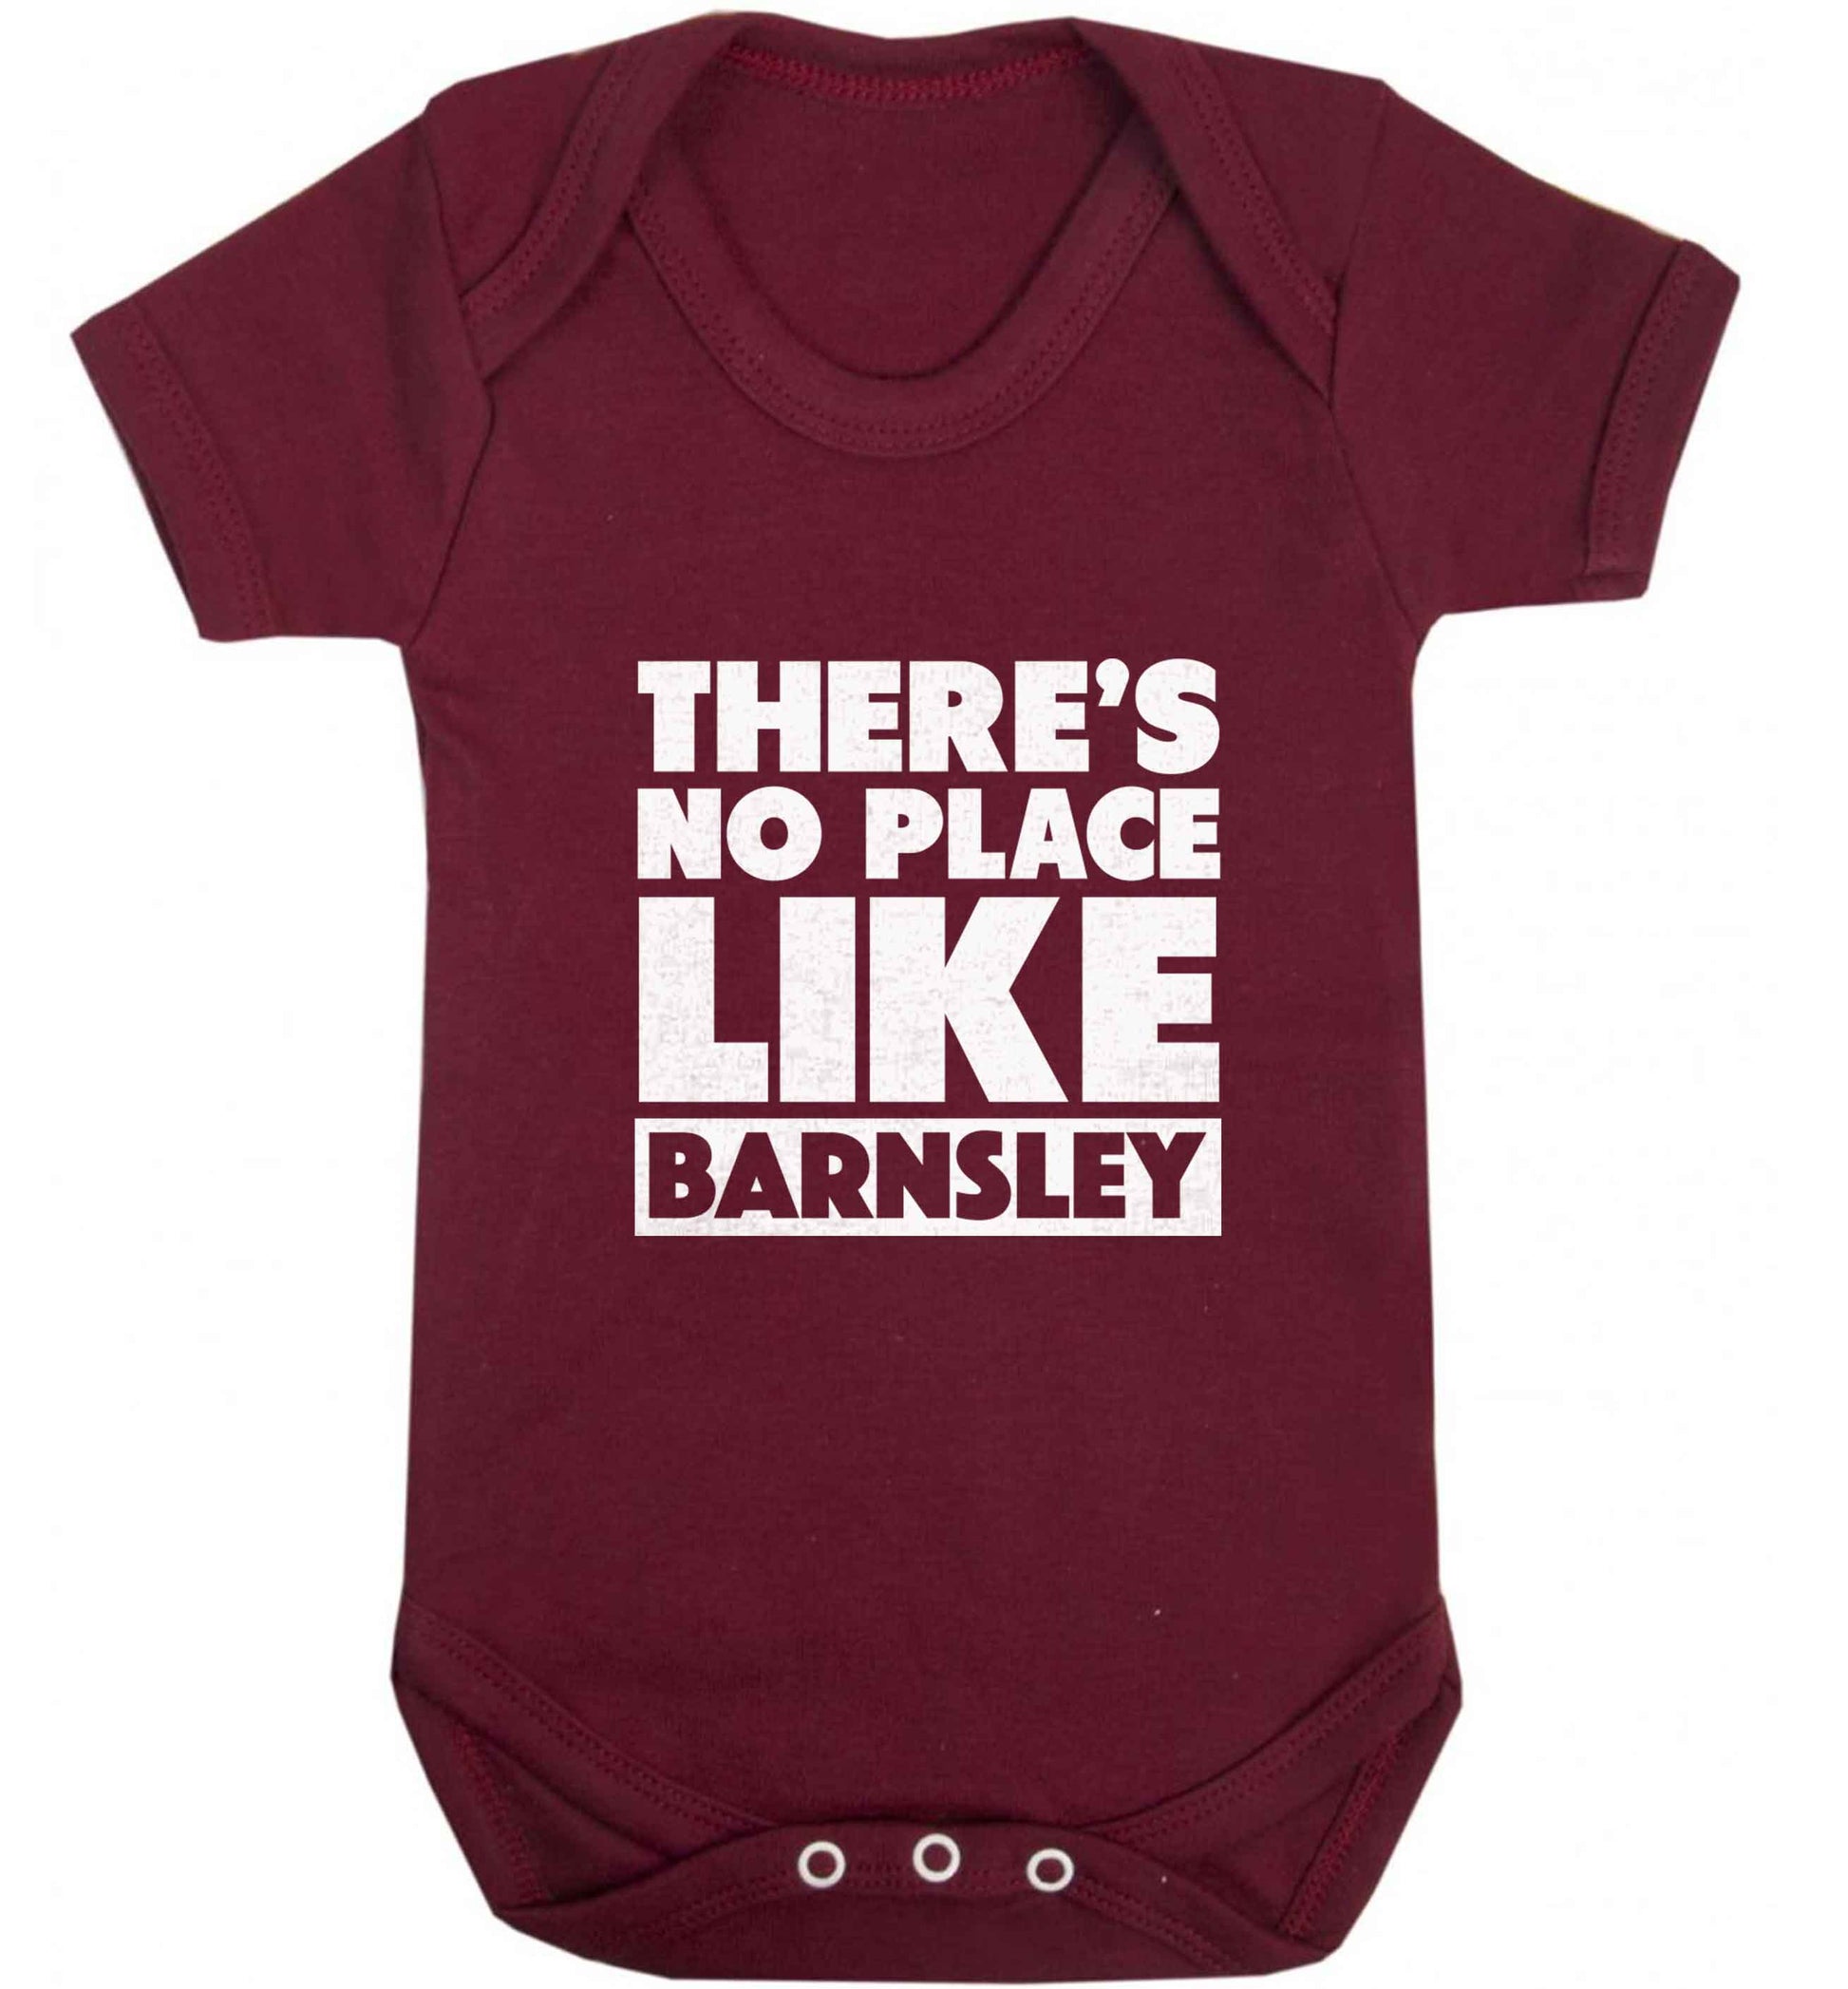 There's No Place Like Barnsley baby vest maroon 18-24 months